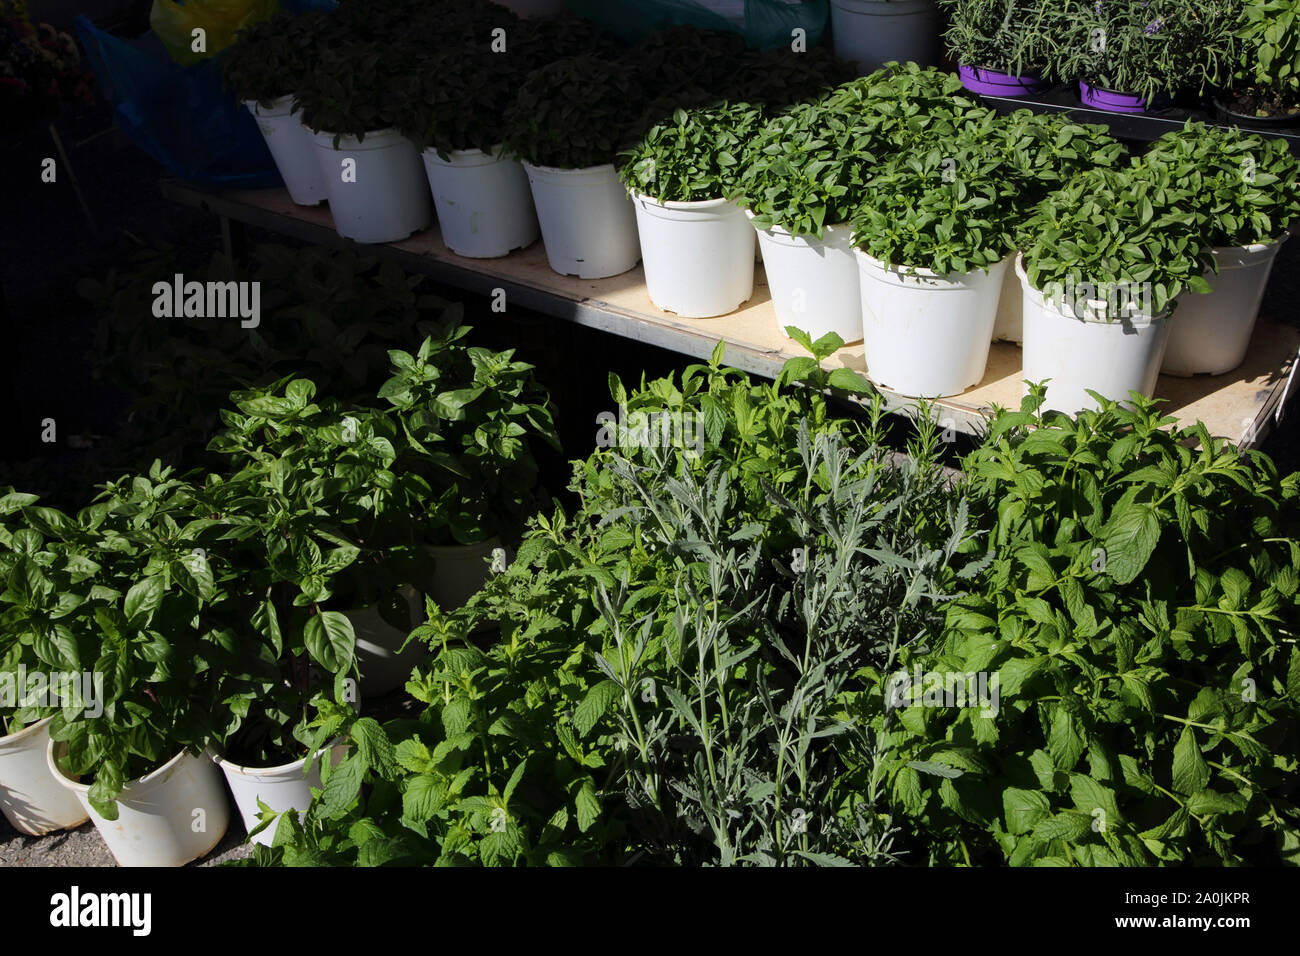 Vouliagmeni Athens Attica Greece Market pots of herbs on sale mint and basil Stock Photo